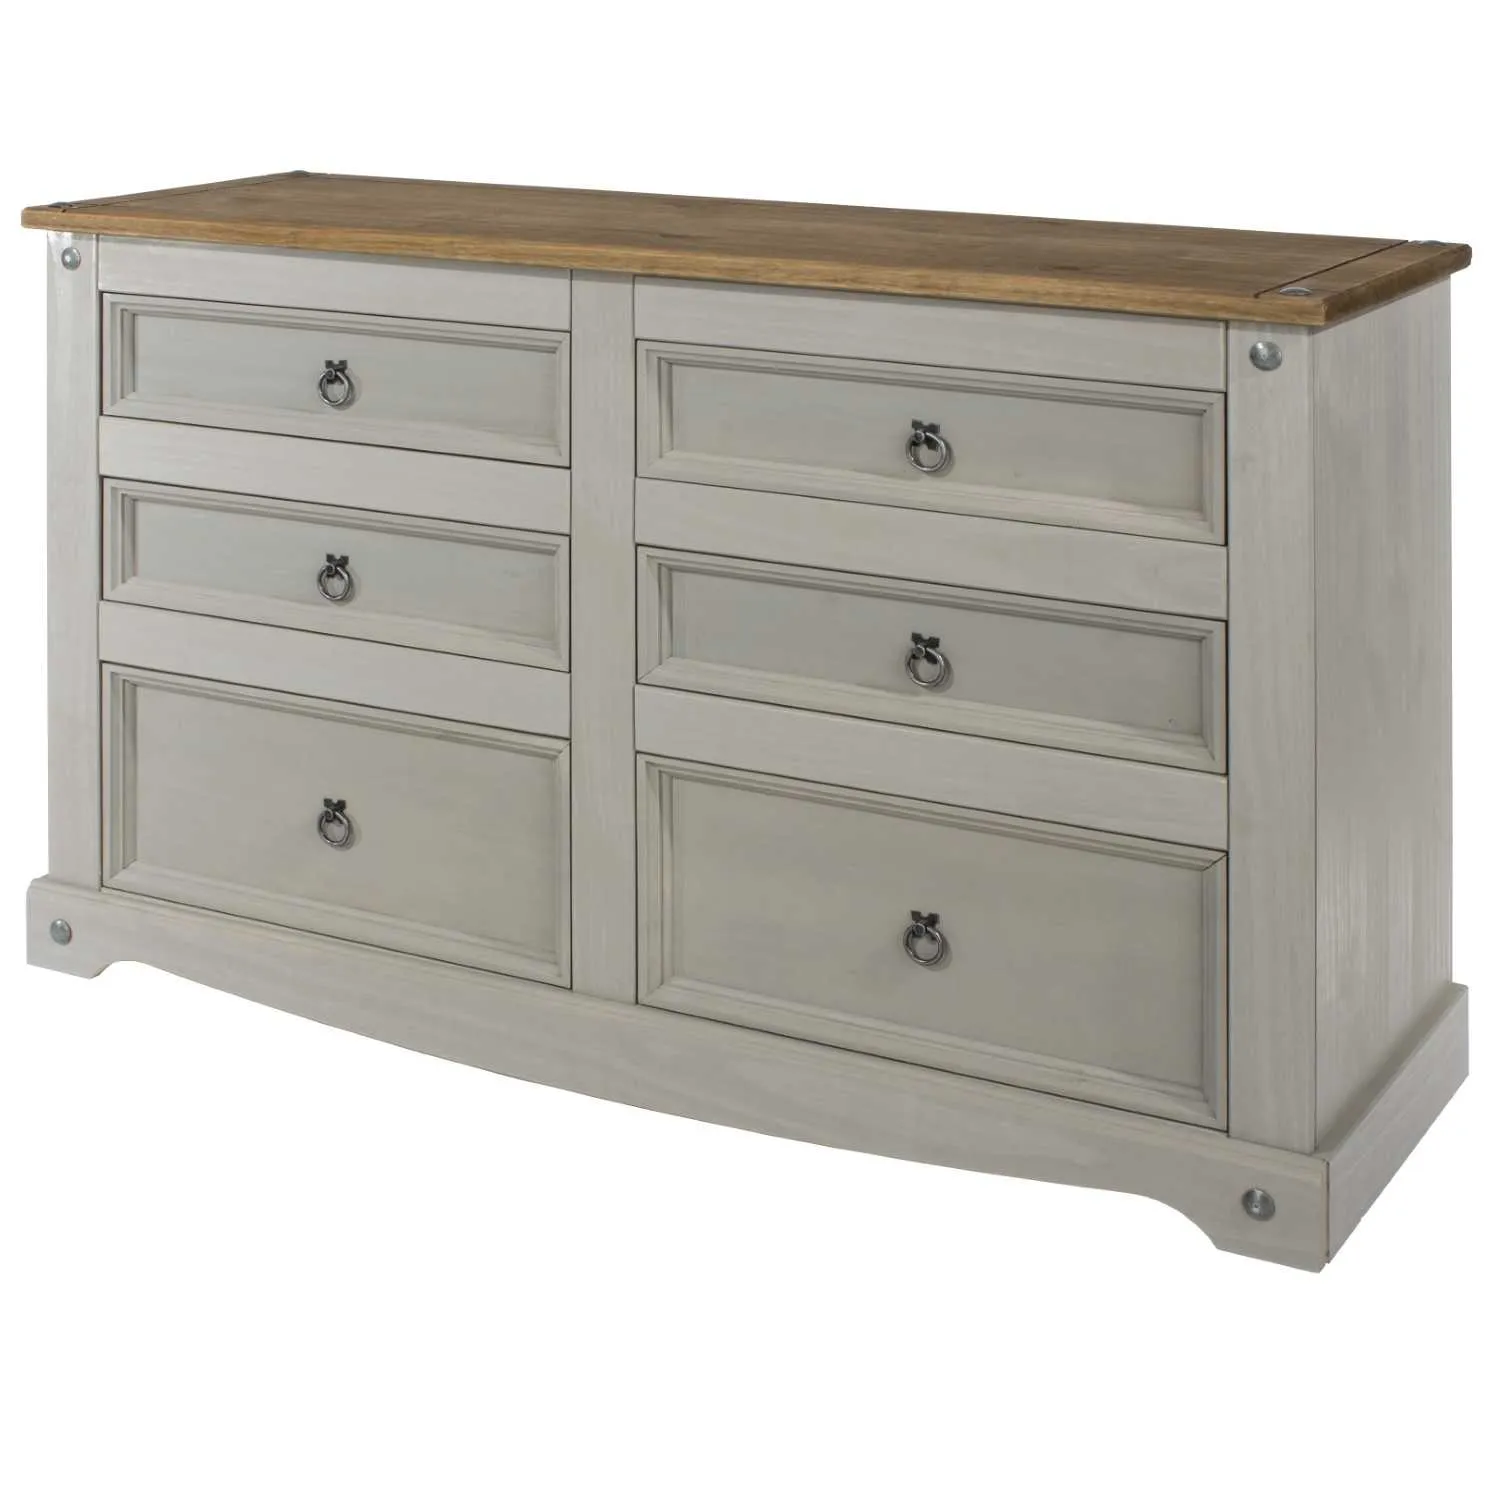 Corona Modern Solid Pine Grey Painted Chest of 6 Drawer 132.1cm Wide